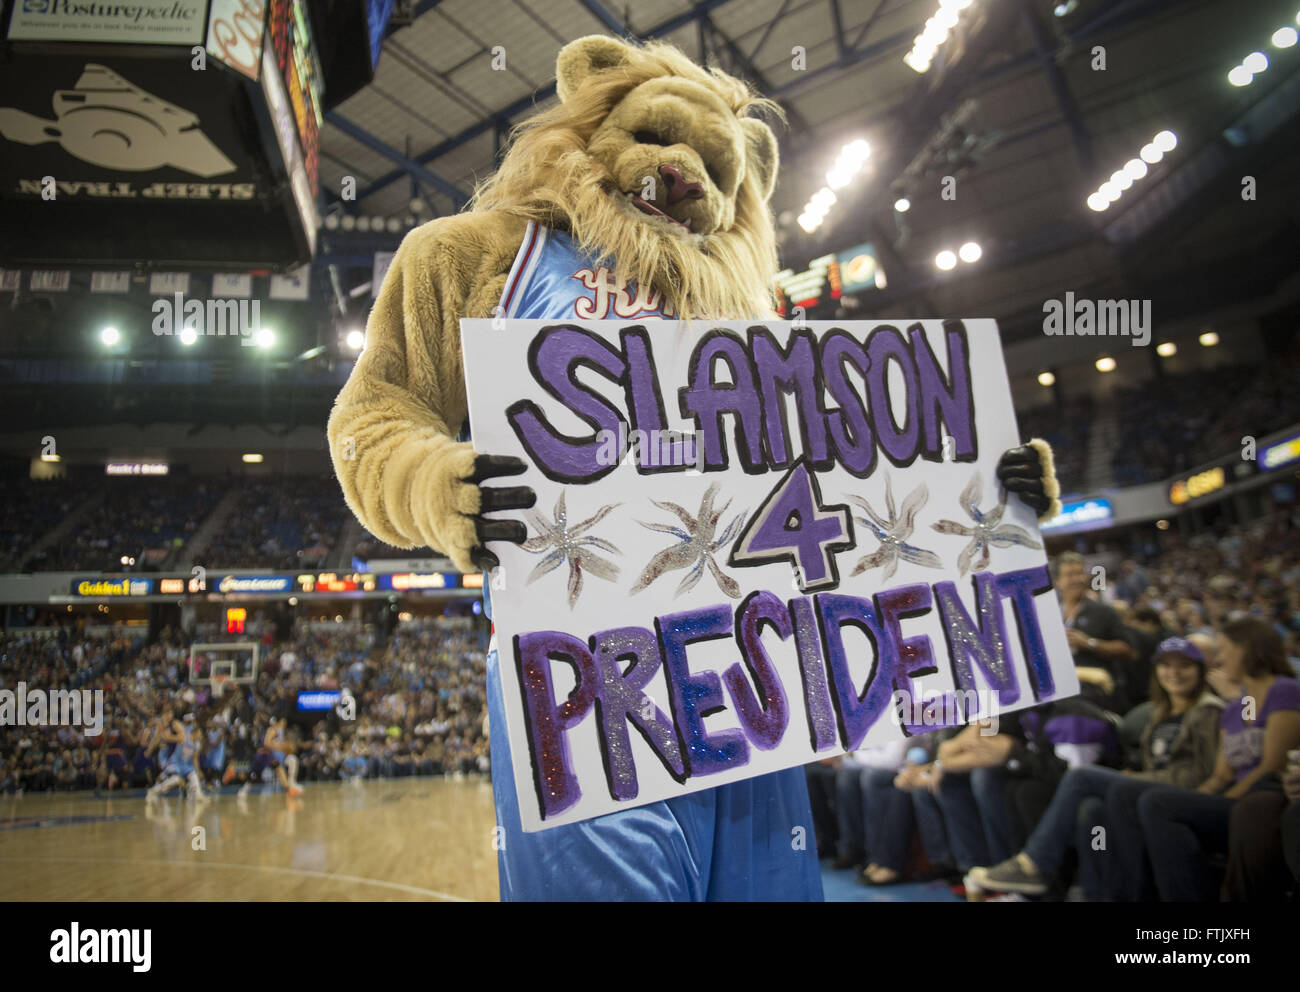 Can we all agree that the Sacramento Kings mascot is terrifying